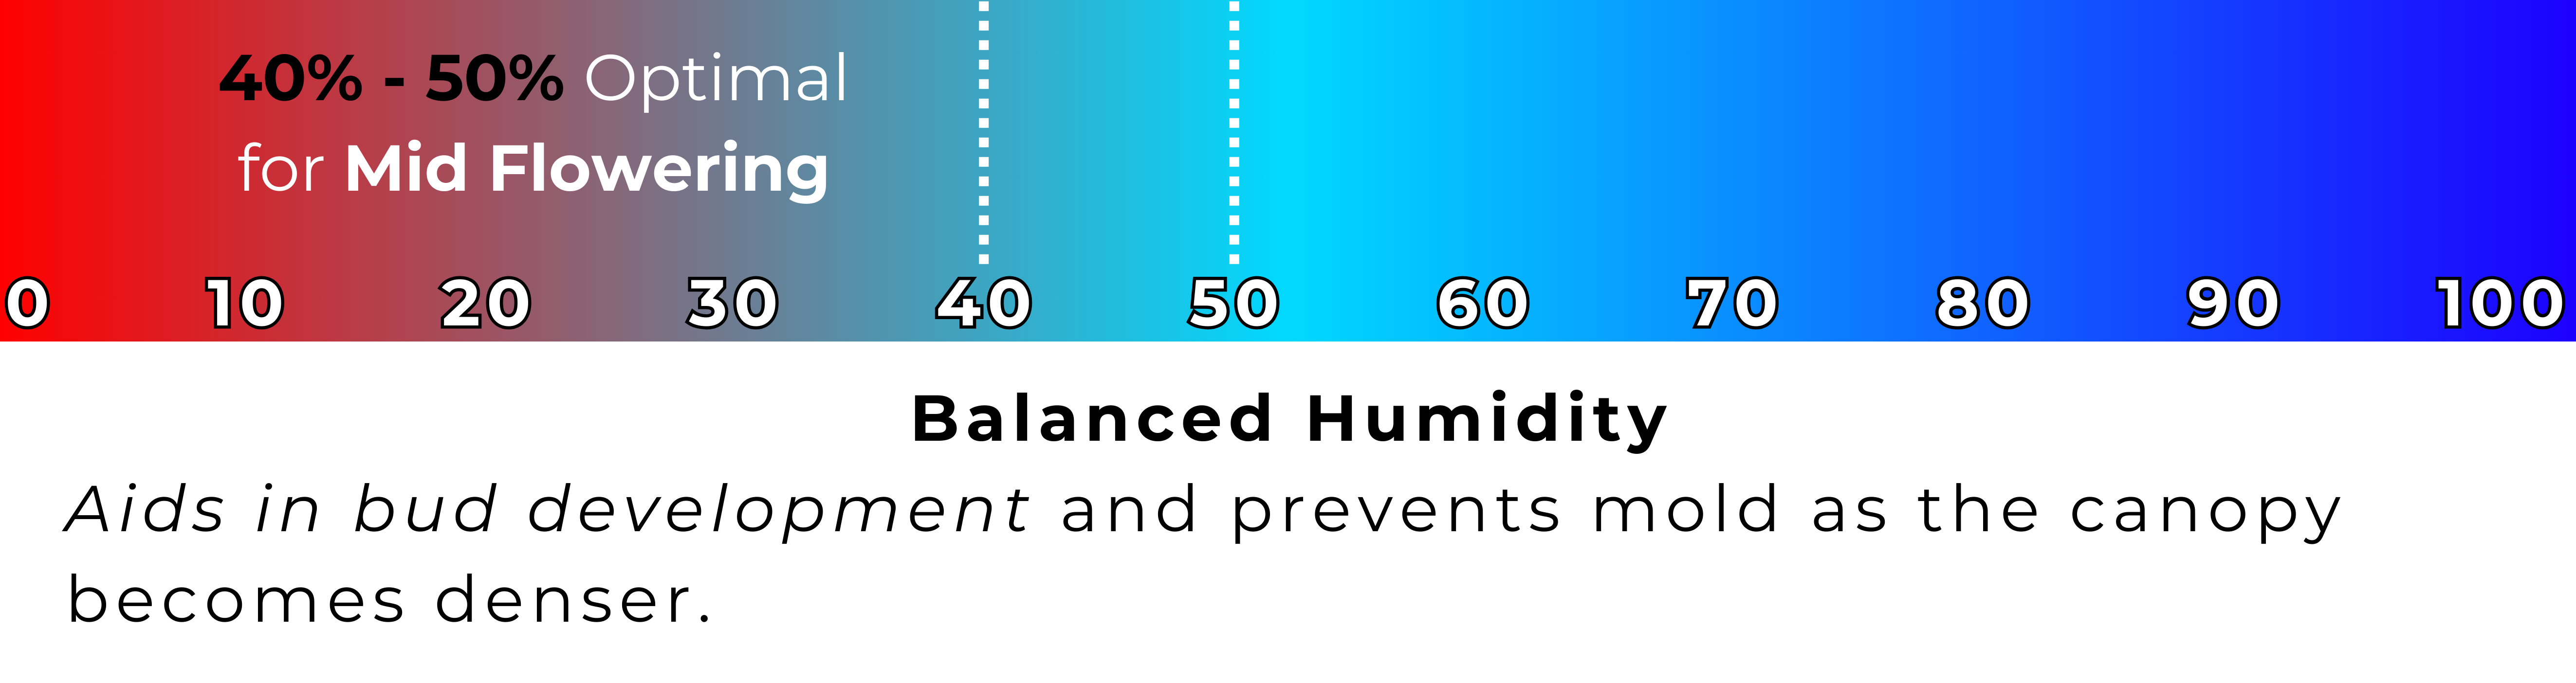 An infographic indicating the 40-50% optimal humidity range for cannabis during the mid flowering stage, depicted on a scale from 0 to 100 with a blue to red gradient. The text underneath highlights the balance of humidity to aid bud development and prevent mold as the canopy becomes denser.